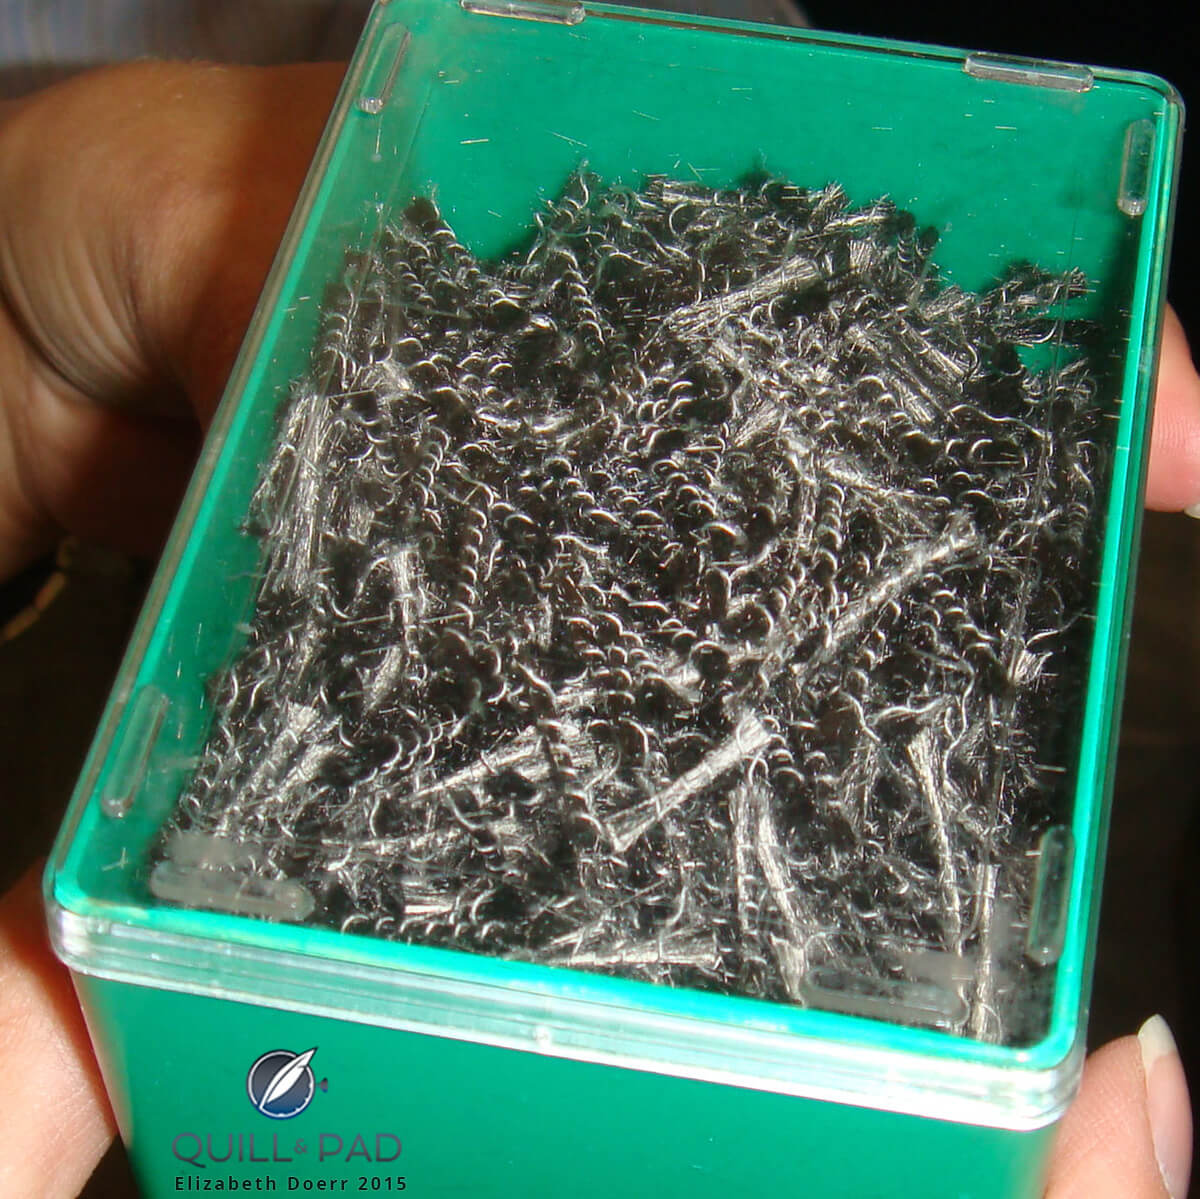 Bundles of carbon fibers ready to be transformed into a high-tech watch case